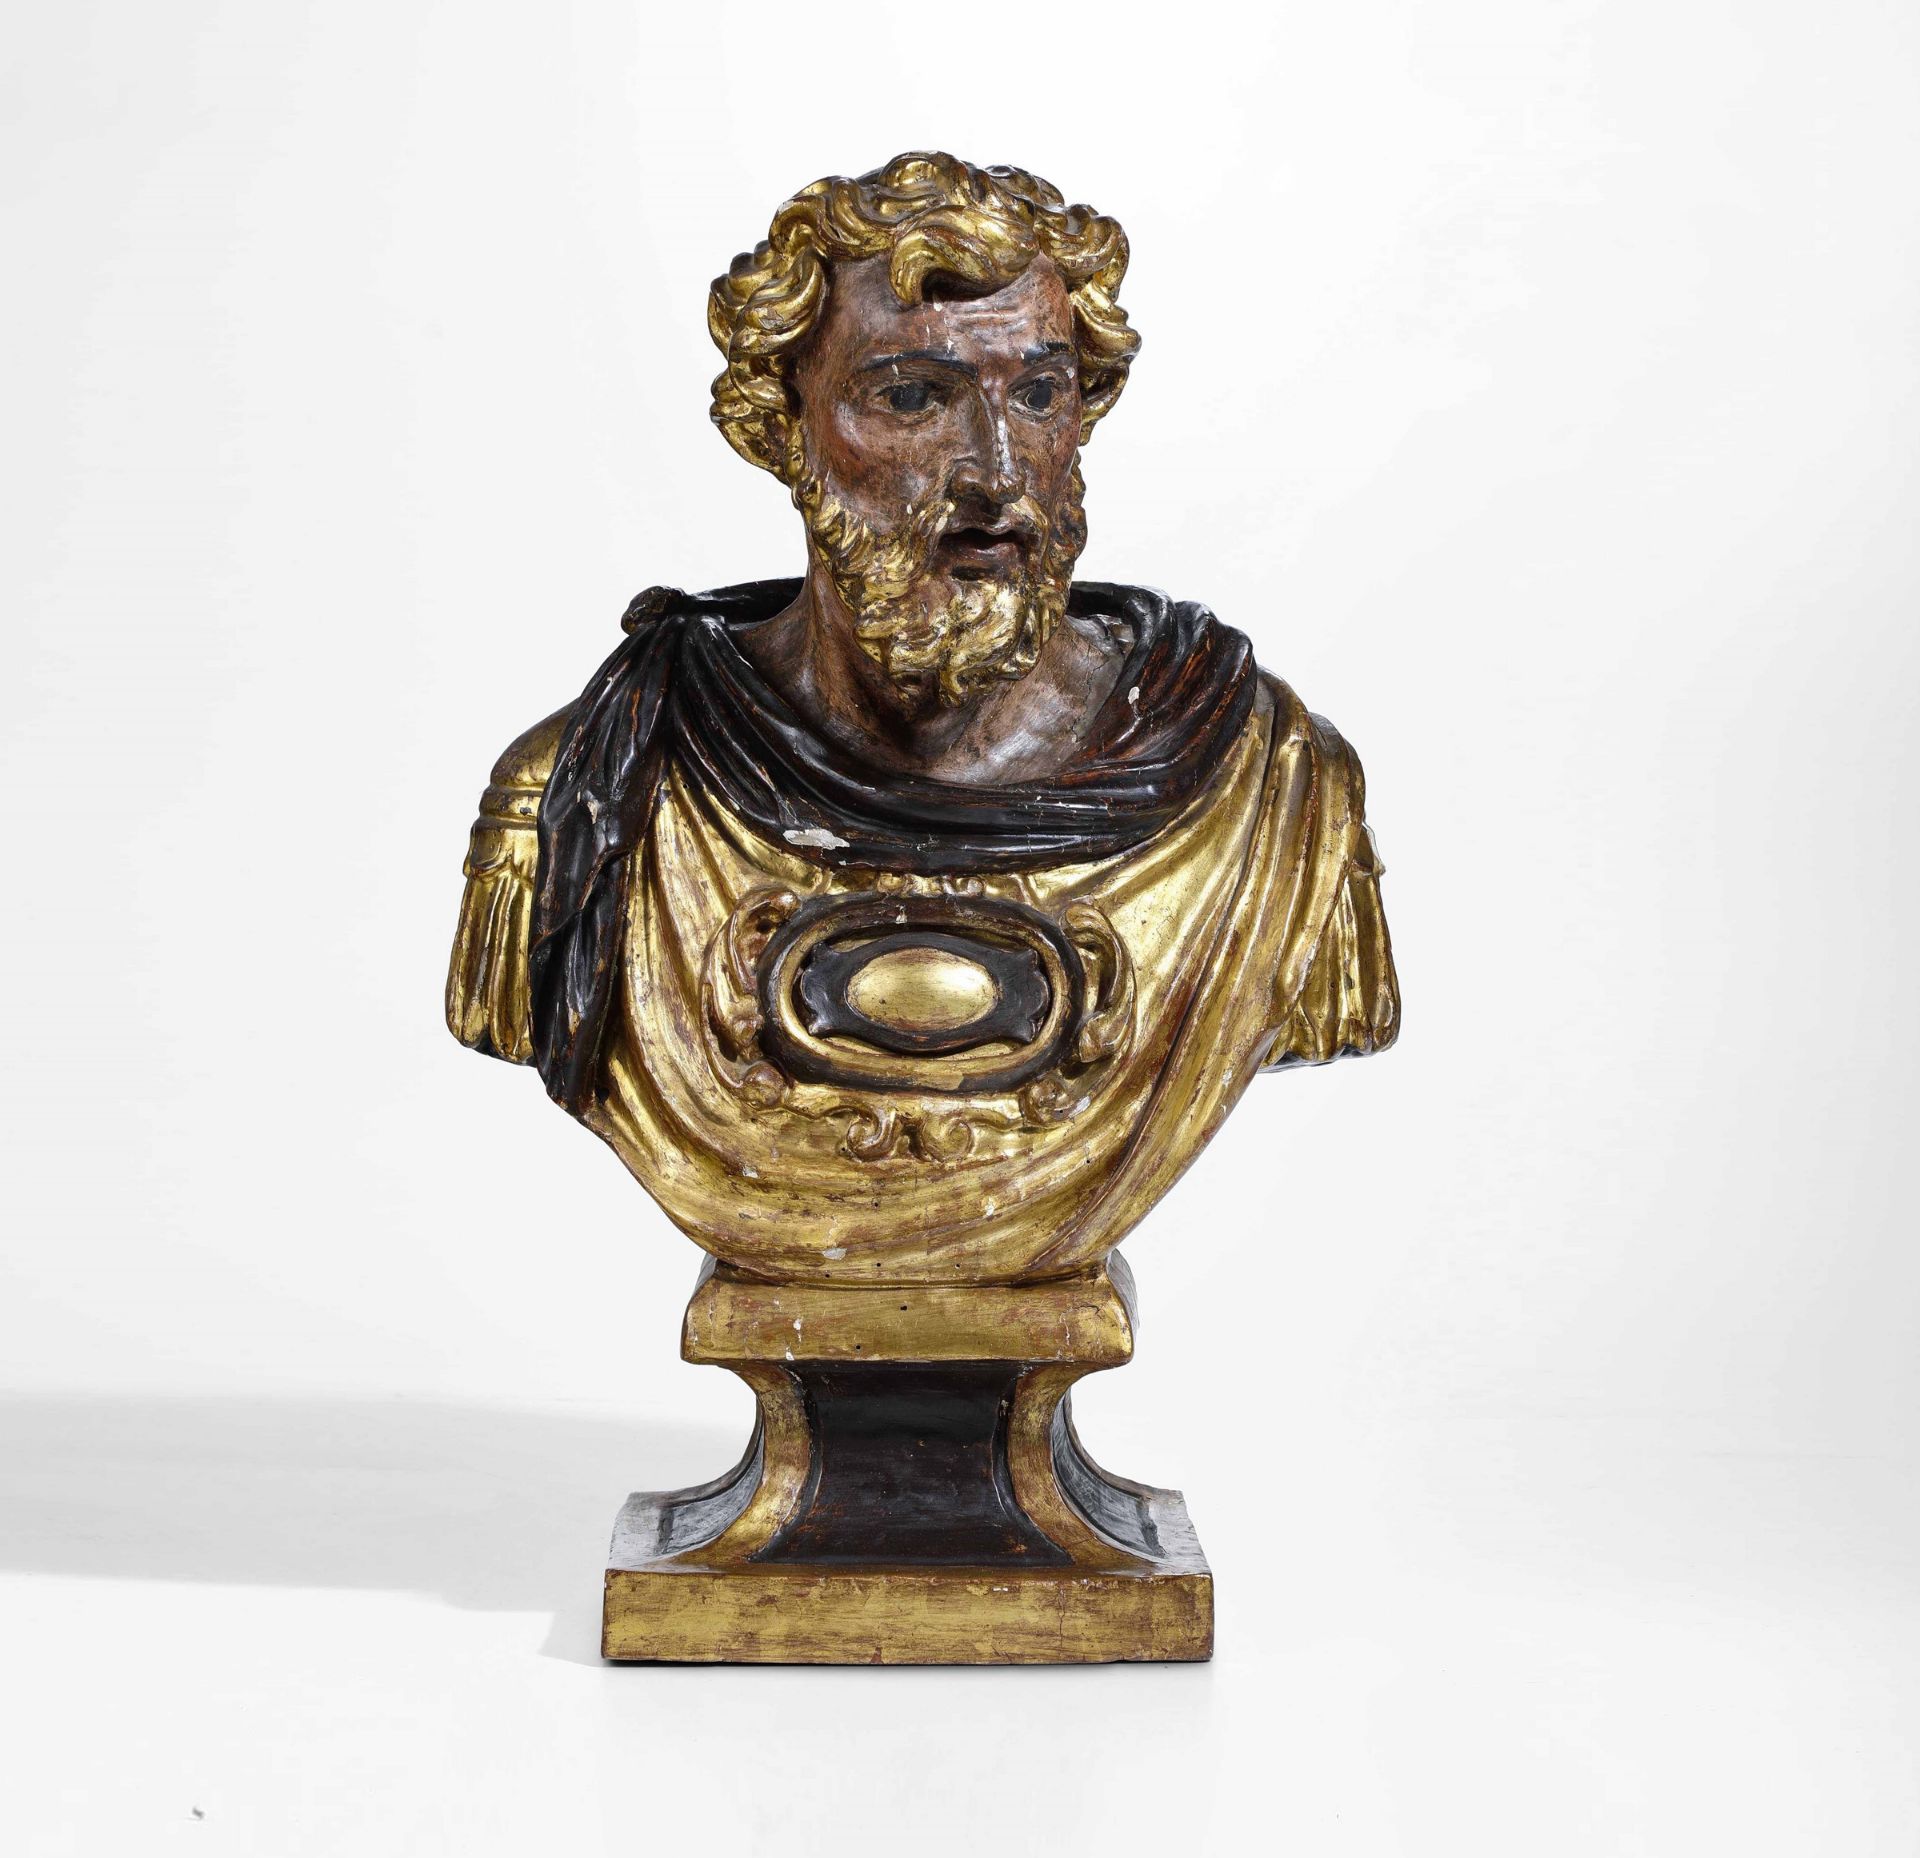 A wooden Saint, Rome (?), early 1600s - cm 63x44 -